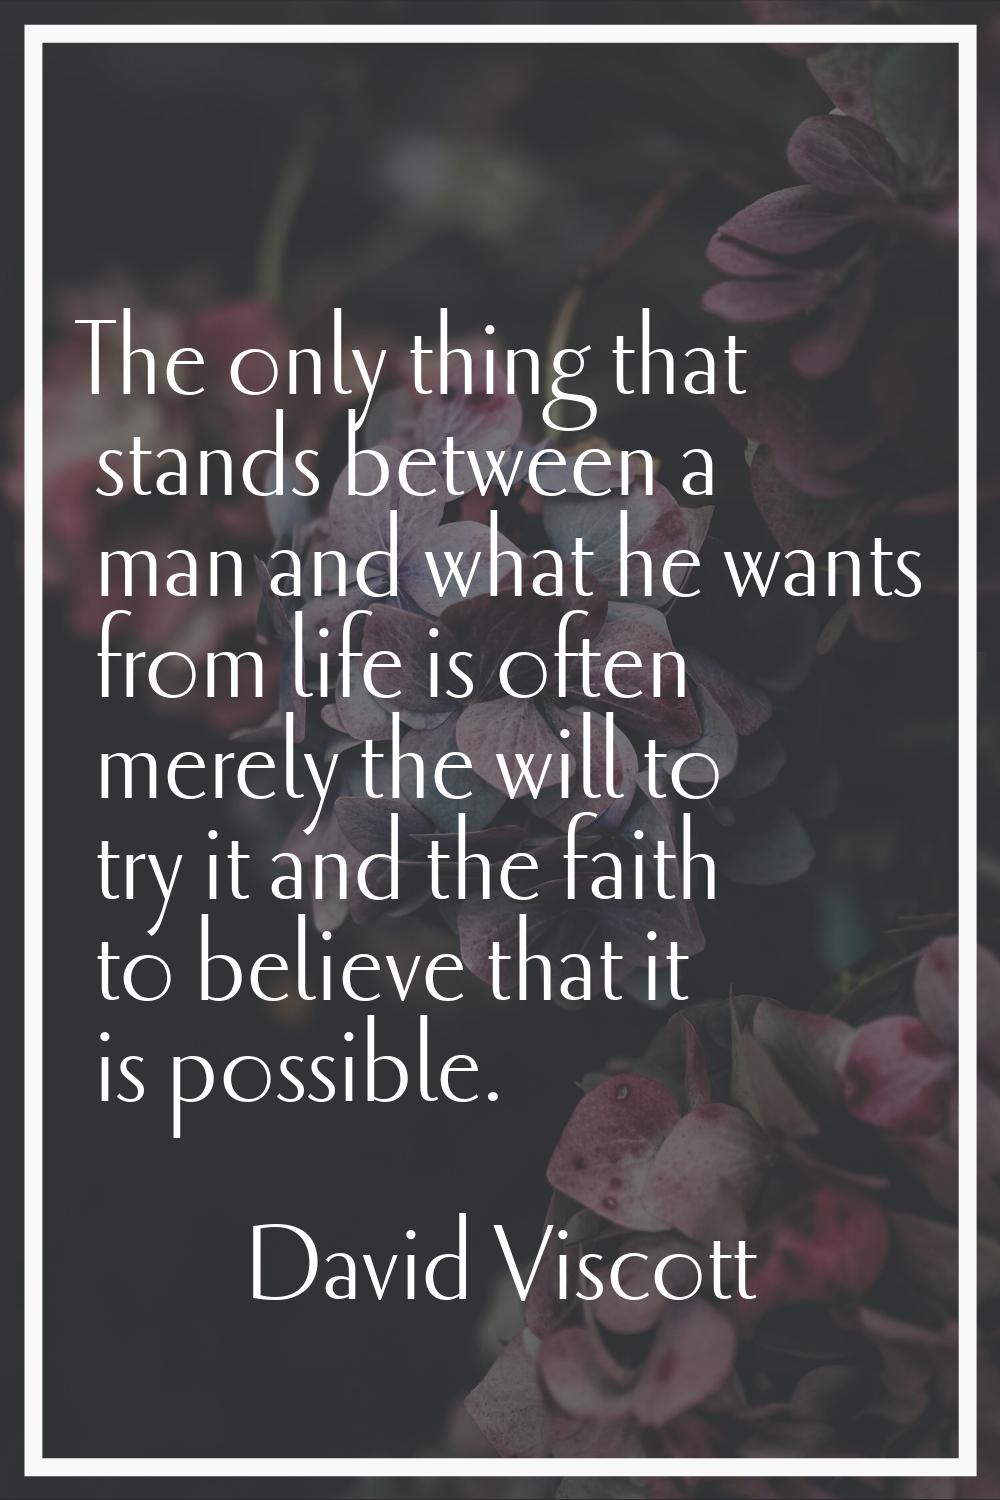 The only thing that stands between a man and what he wants from life is often merely the will to tr